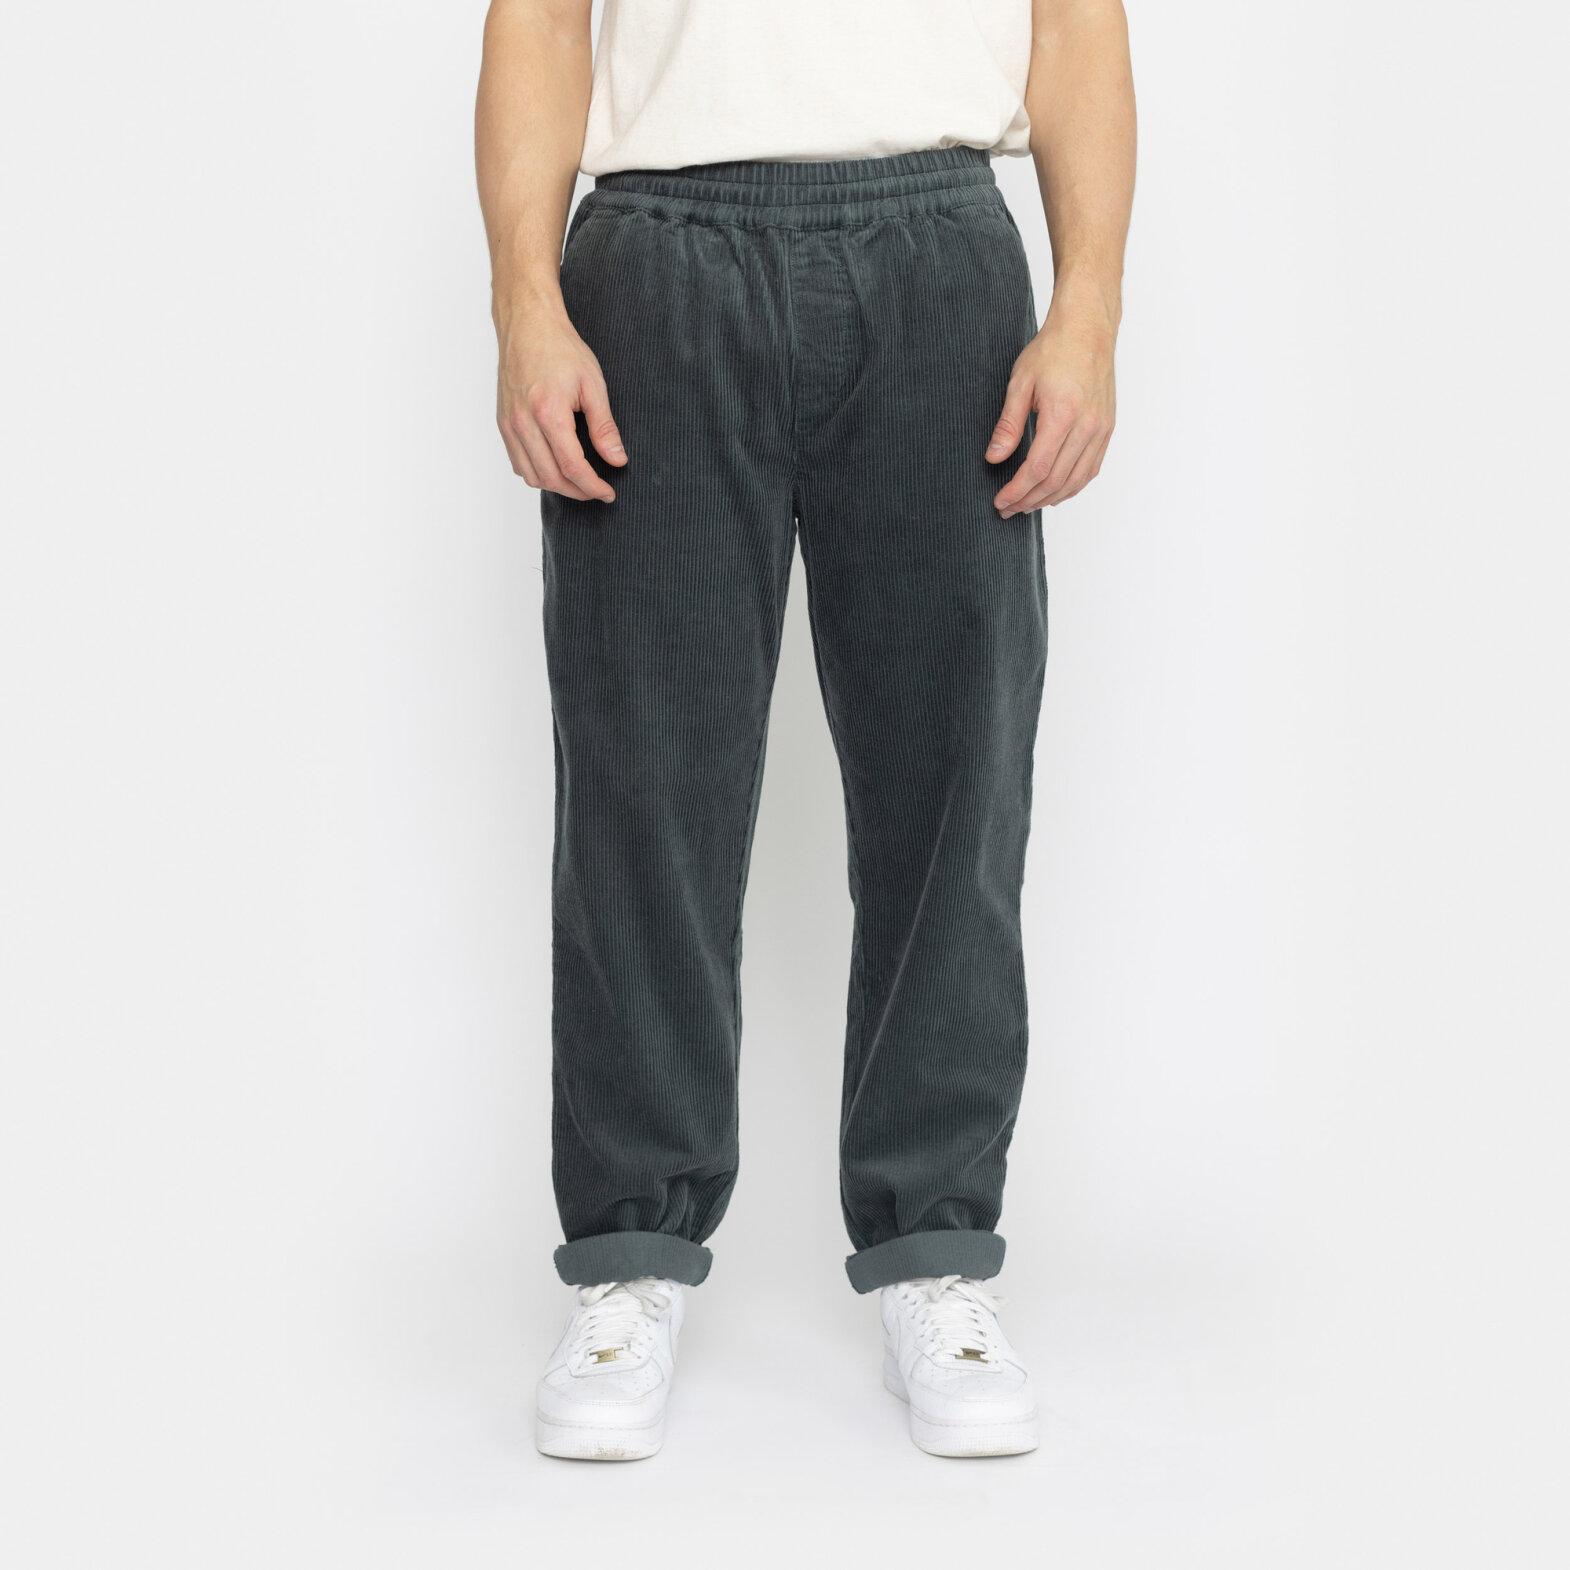 Revolution casual trousers 1570x1570c 4 1